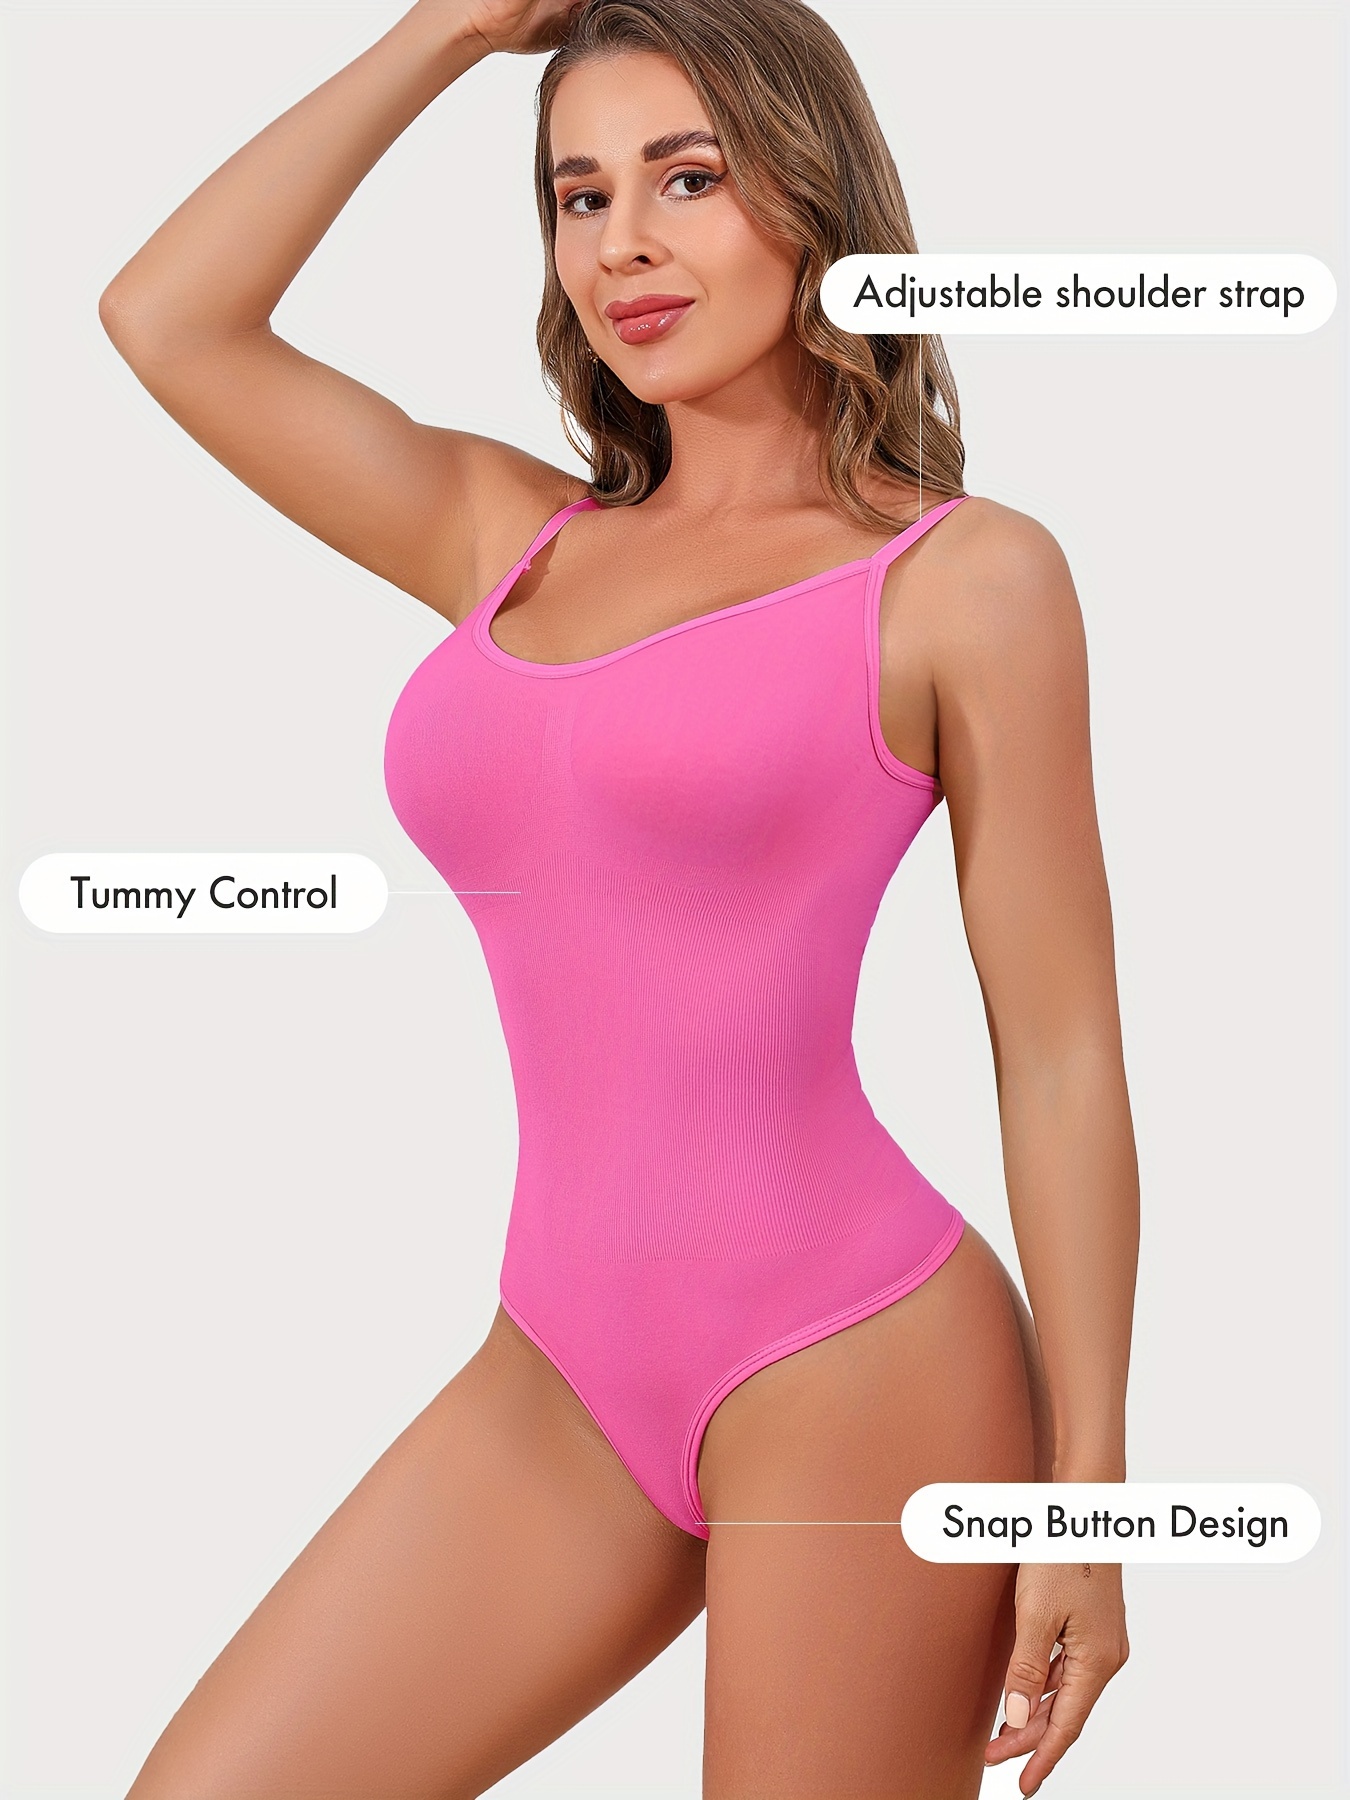 Women's 3 Piece Bodysuits Shapewear for Women Tummy Control Sexy Seamless  Thong Full Body Shapewear Body Suits Clothing (Color : 3pcs, Size 